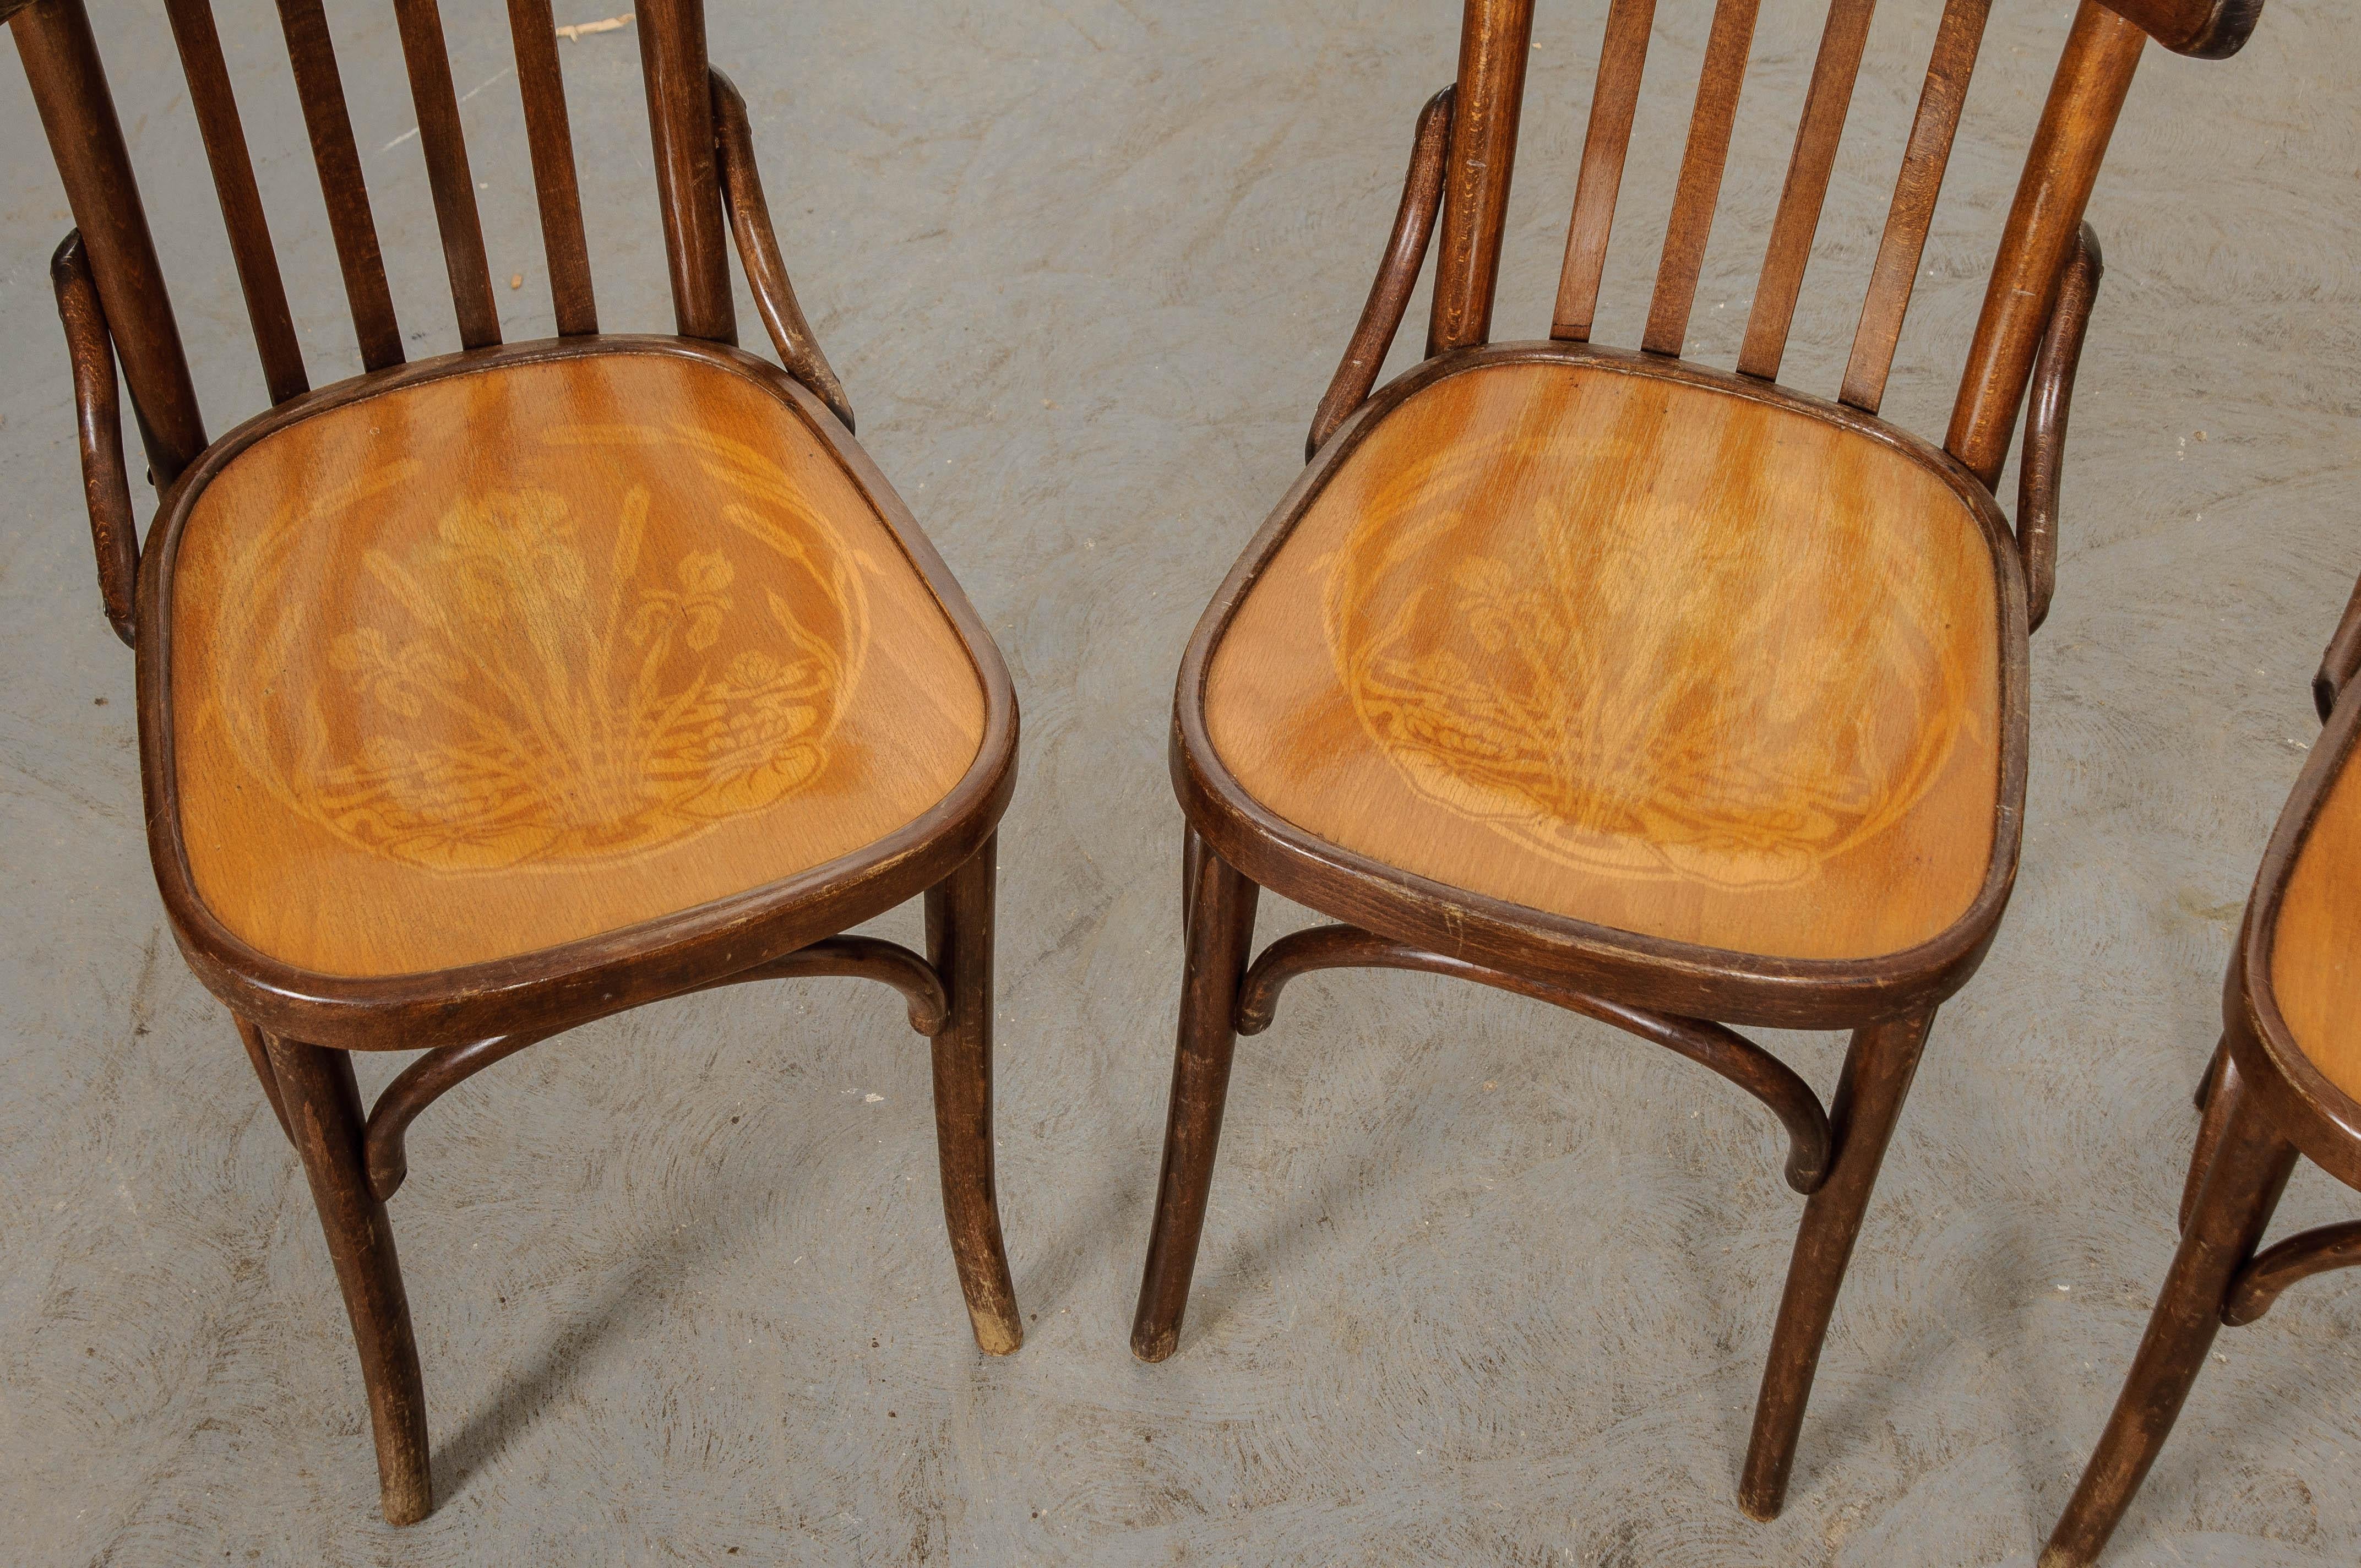 A charming set of French bentwood dining chairs from the early part of the 20th century. The oak chairs have a Classic bistro/cafe style that makes for wonderful dining chairs. The chairs’ seats have a lighter, more golden tone than the oak used to